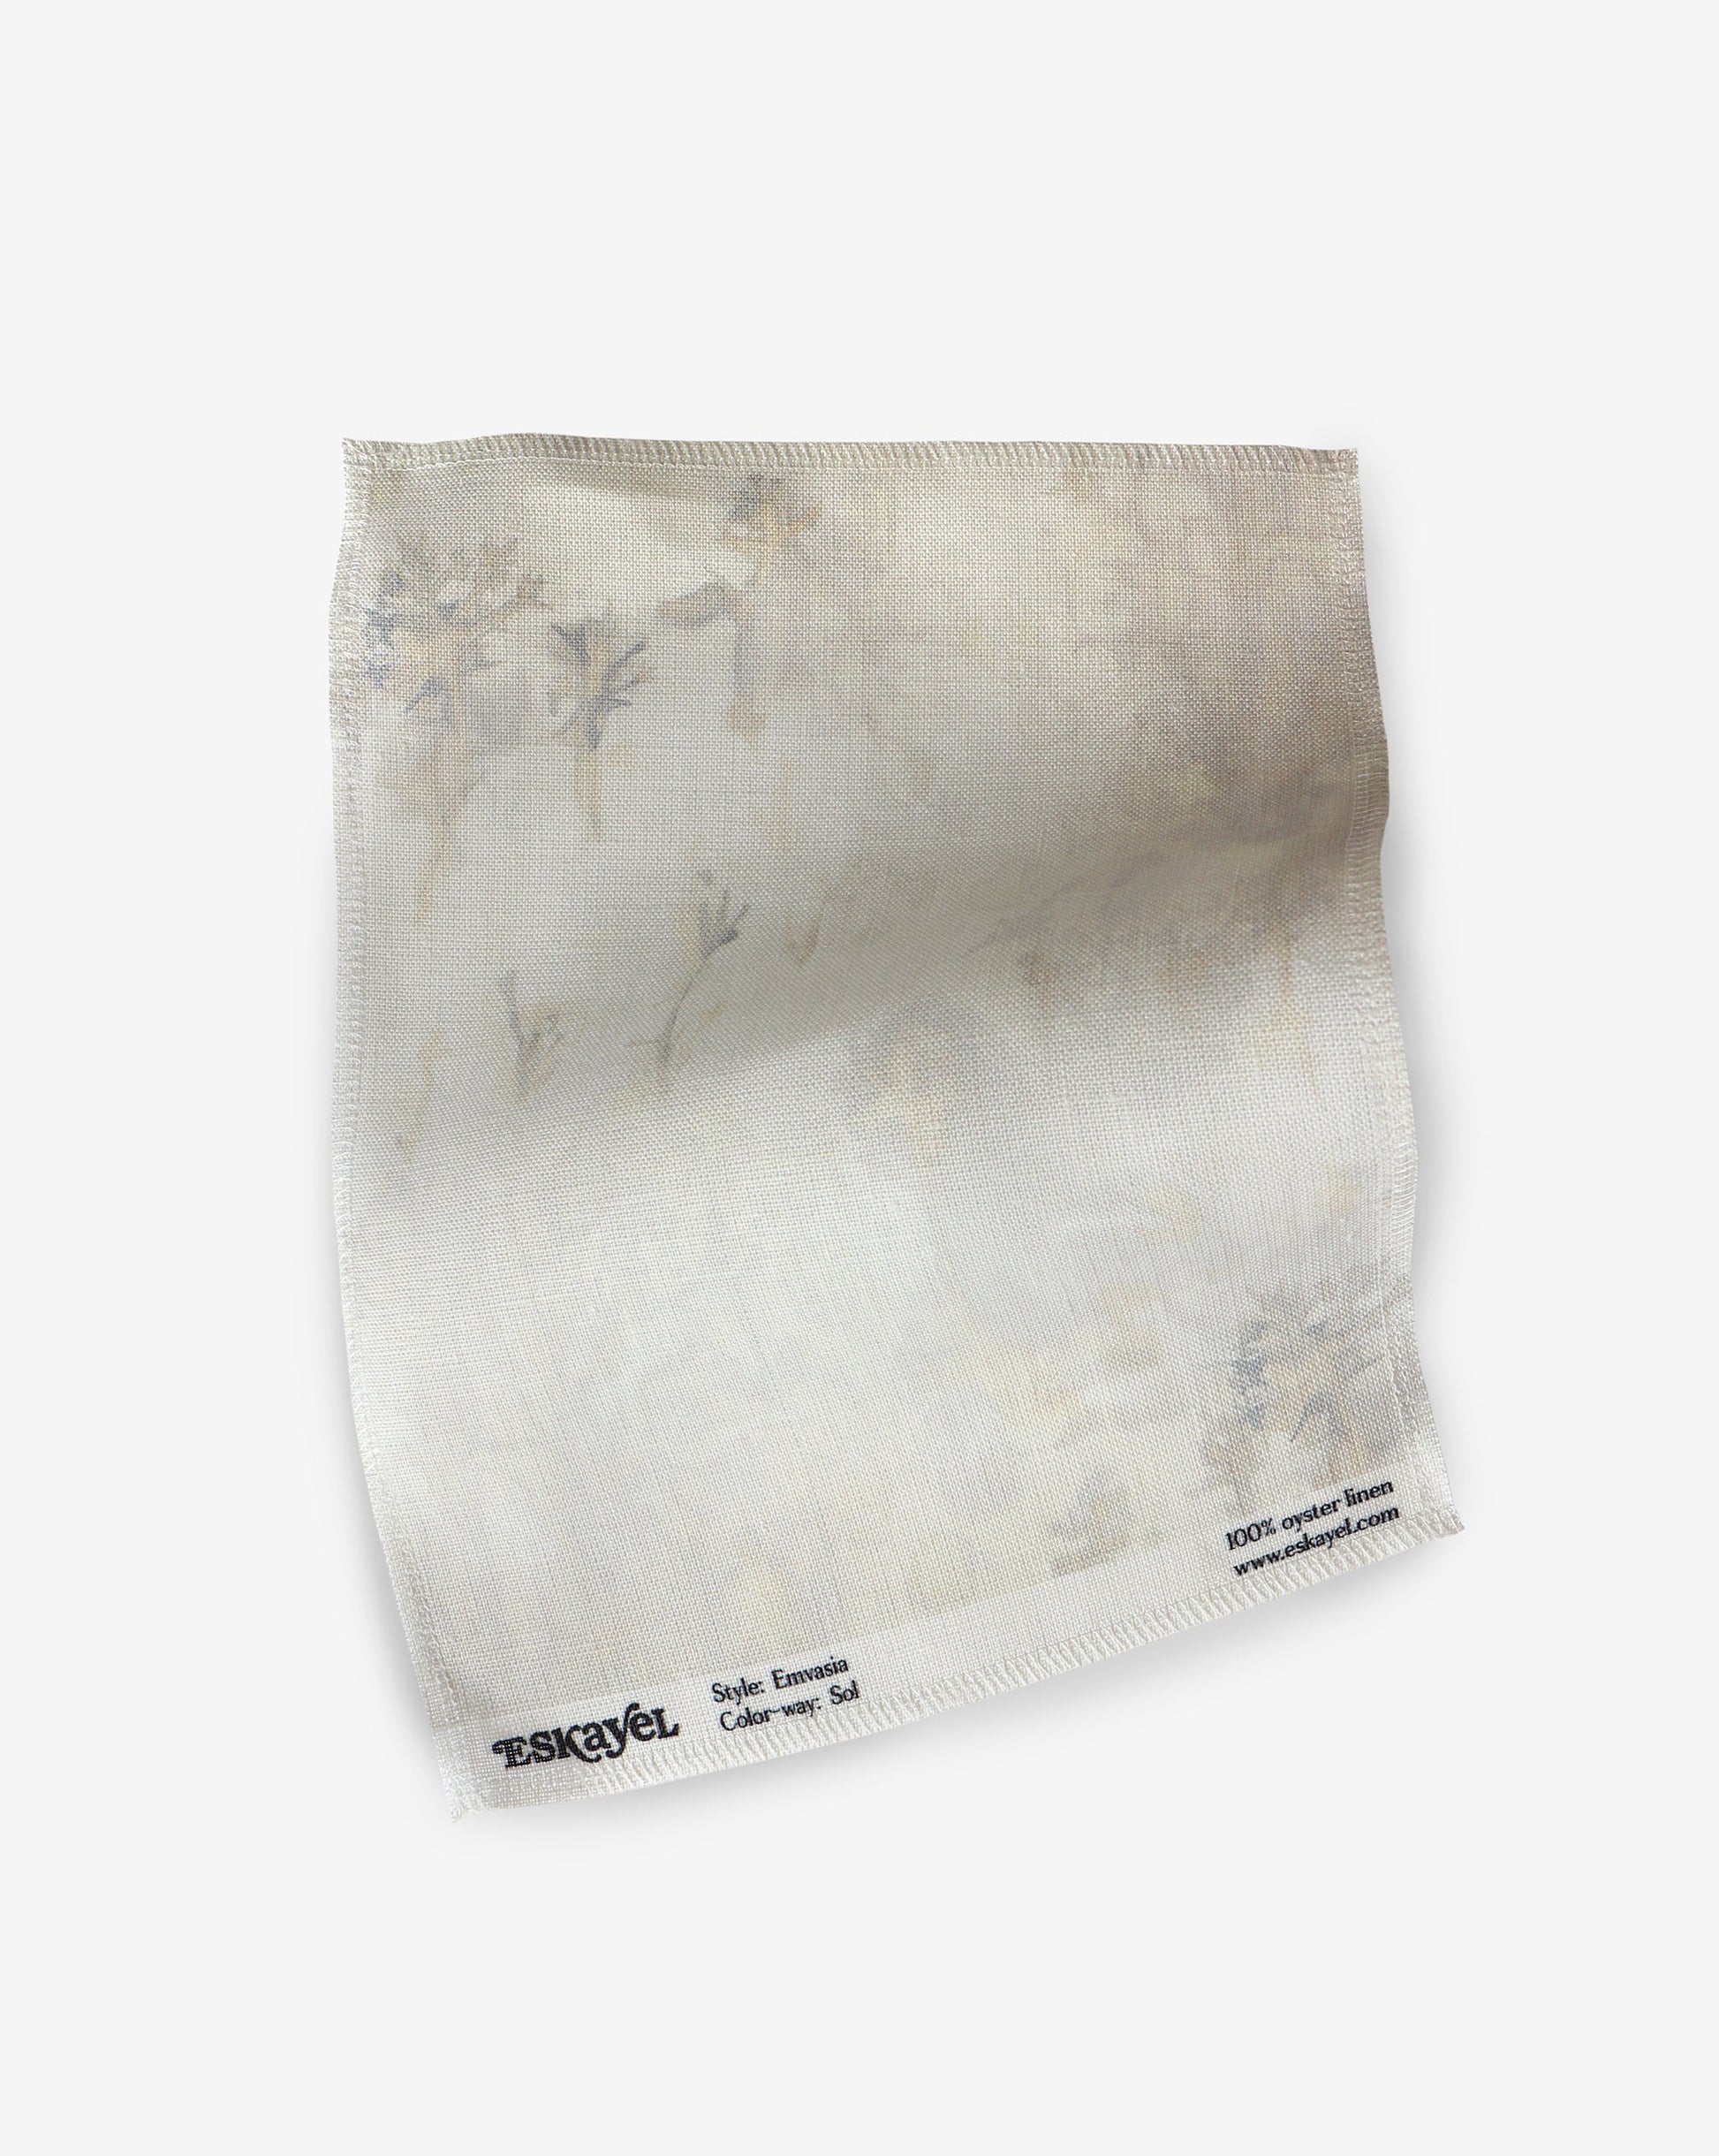 A piece of fabric with a white background is a canvas for the Emvasia Fabric Sol keywords on display